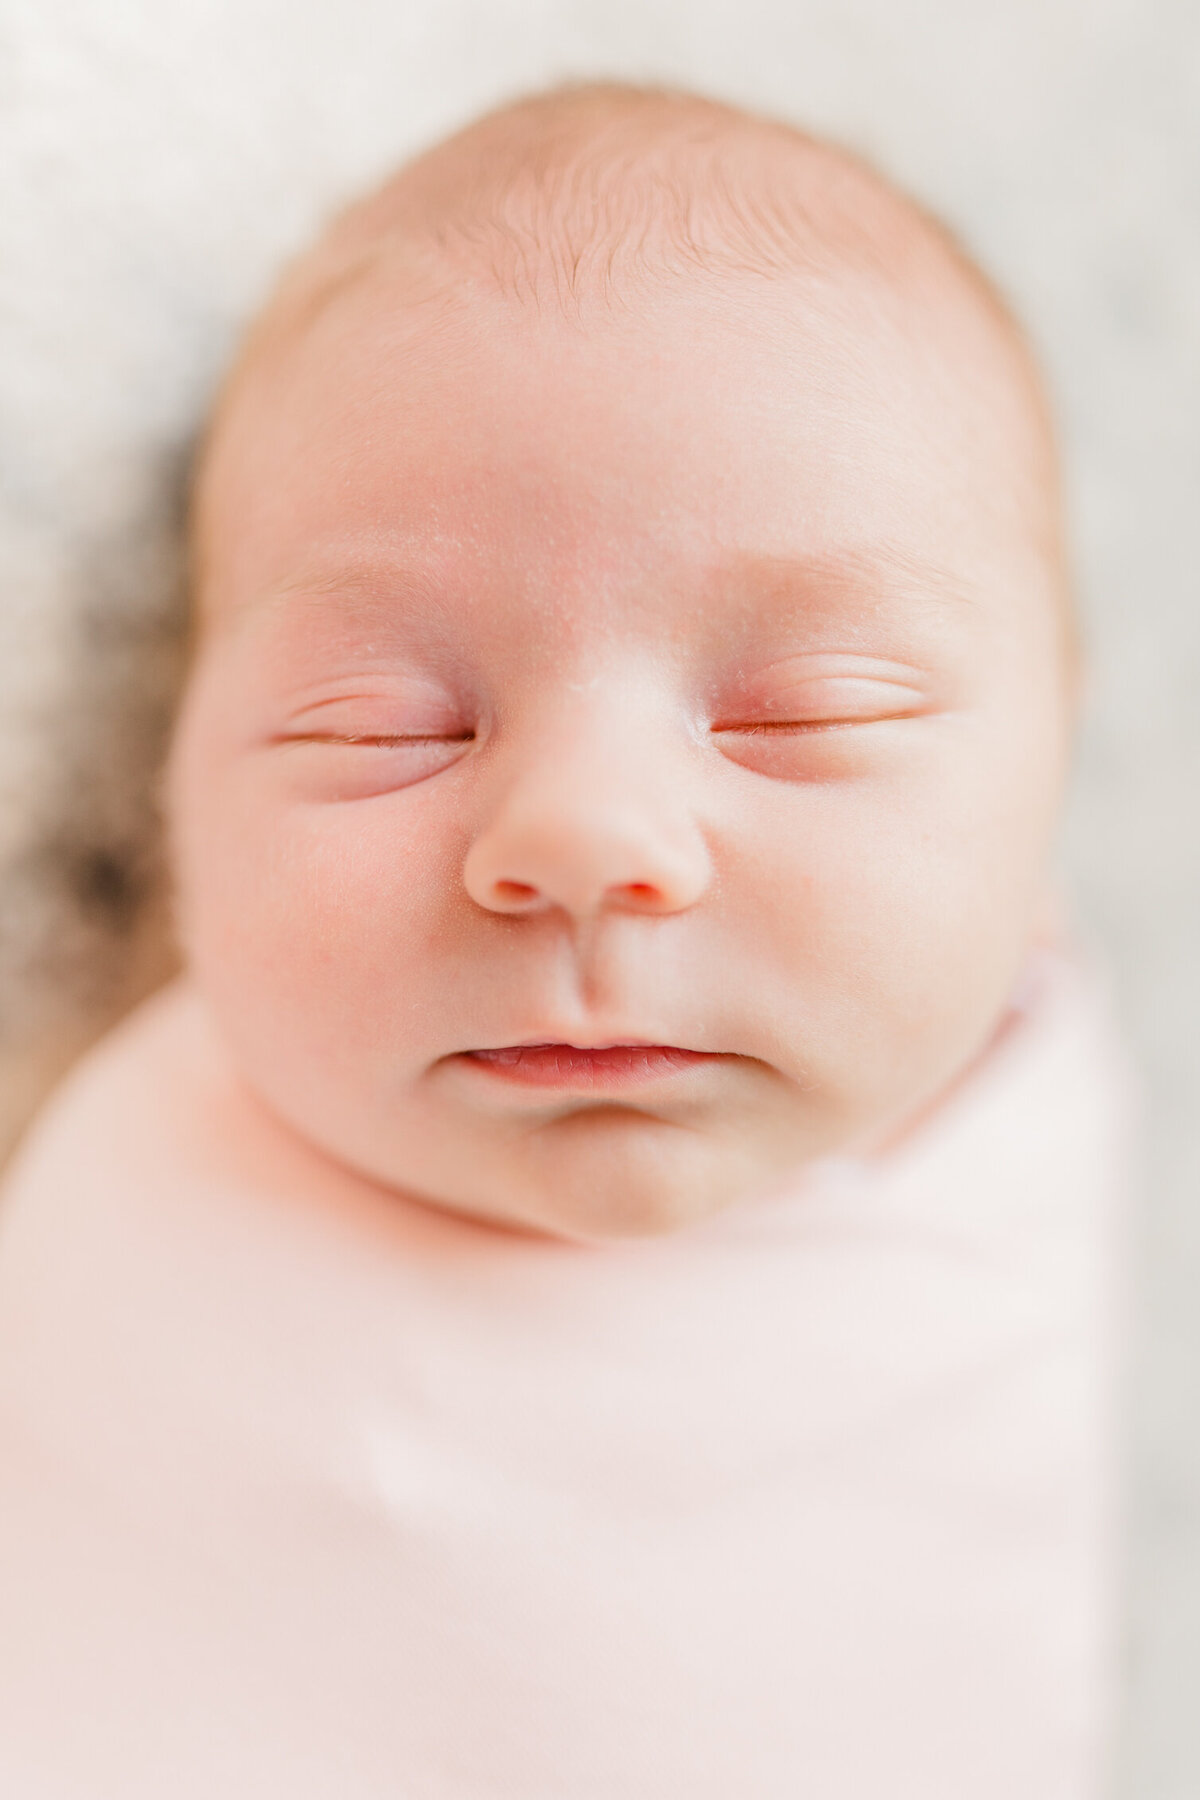 Massachusetts newborn sleeping soundly in a soft pink swaddle